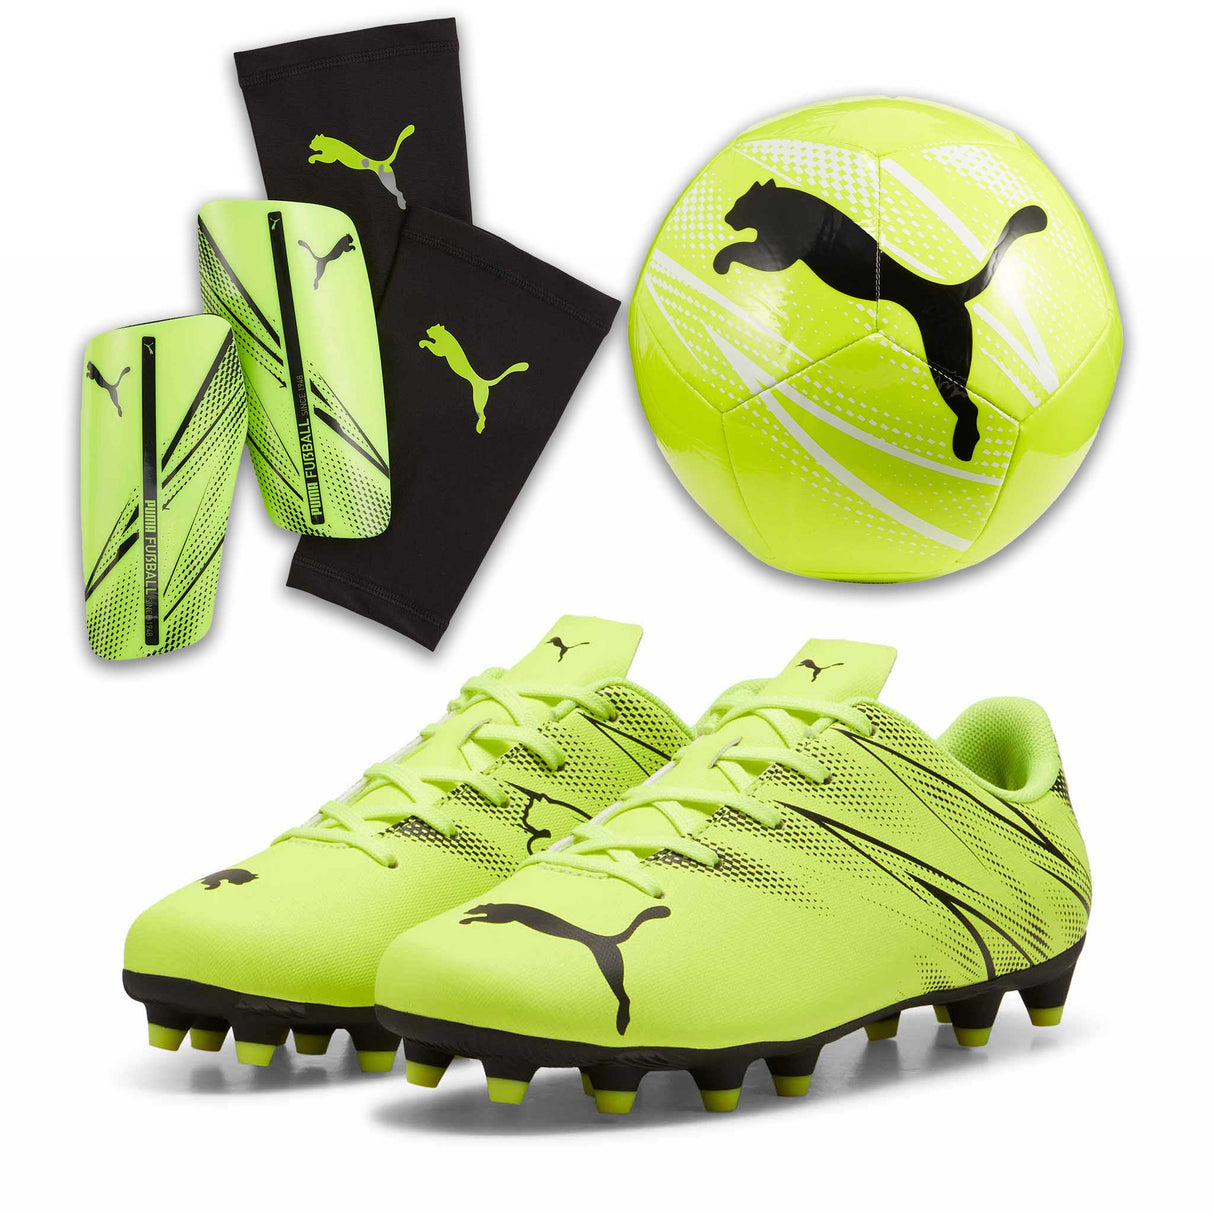 Puma Attacanto Bundle: Soccer cleats, ball and shinguards for kids